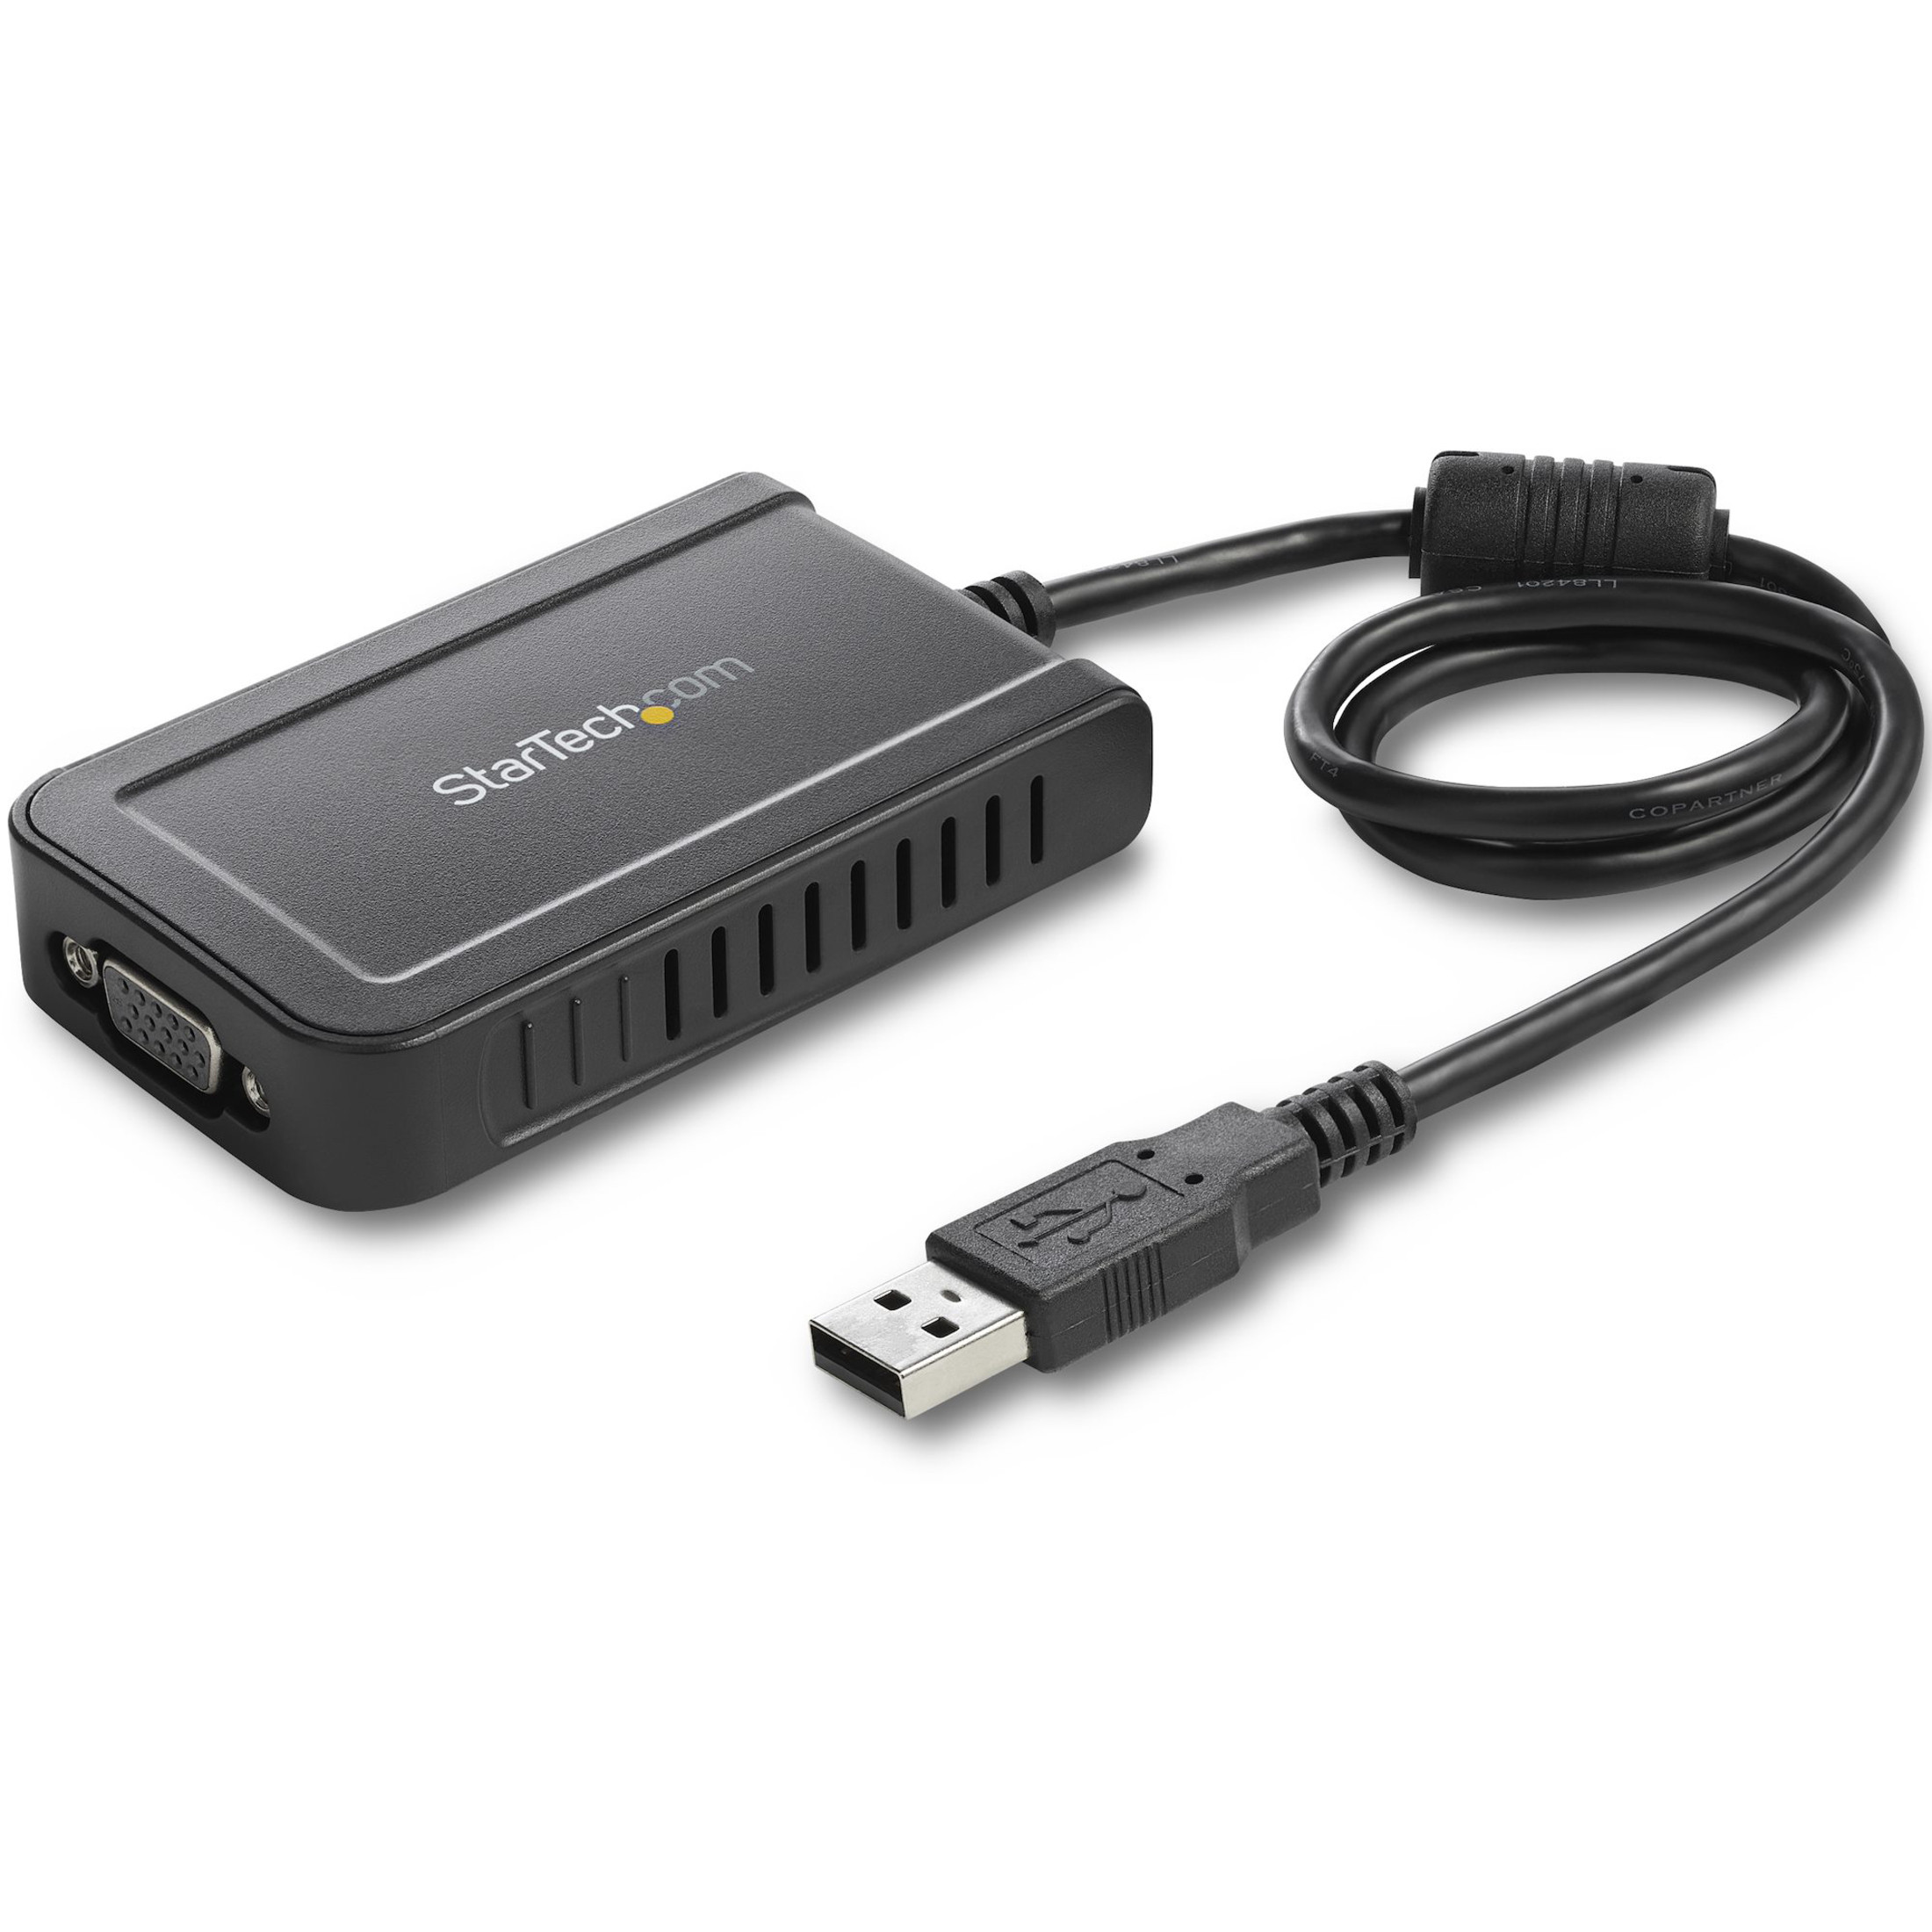 Startech .com USB to VGA External Video Card Multi Monitor Adapter1920x1200Connect a VGA display for an entry-level extended desktop, mul… USB2VGAE3